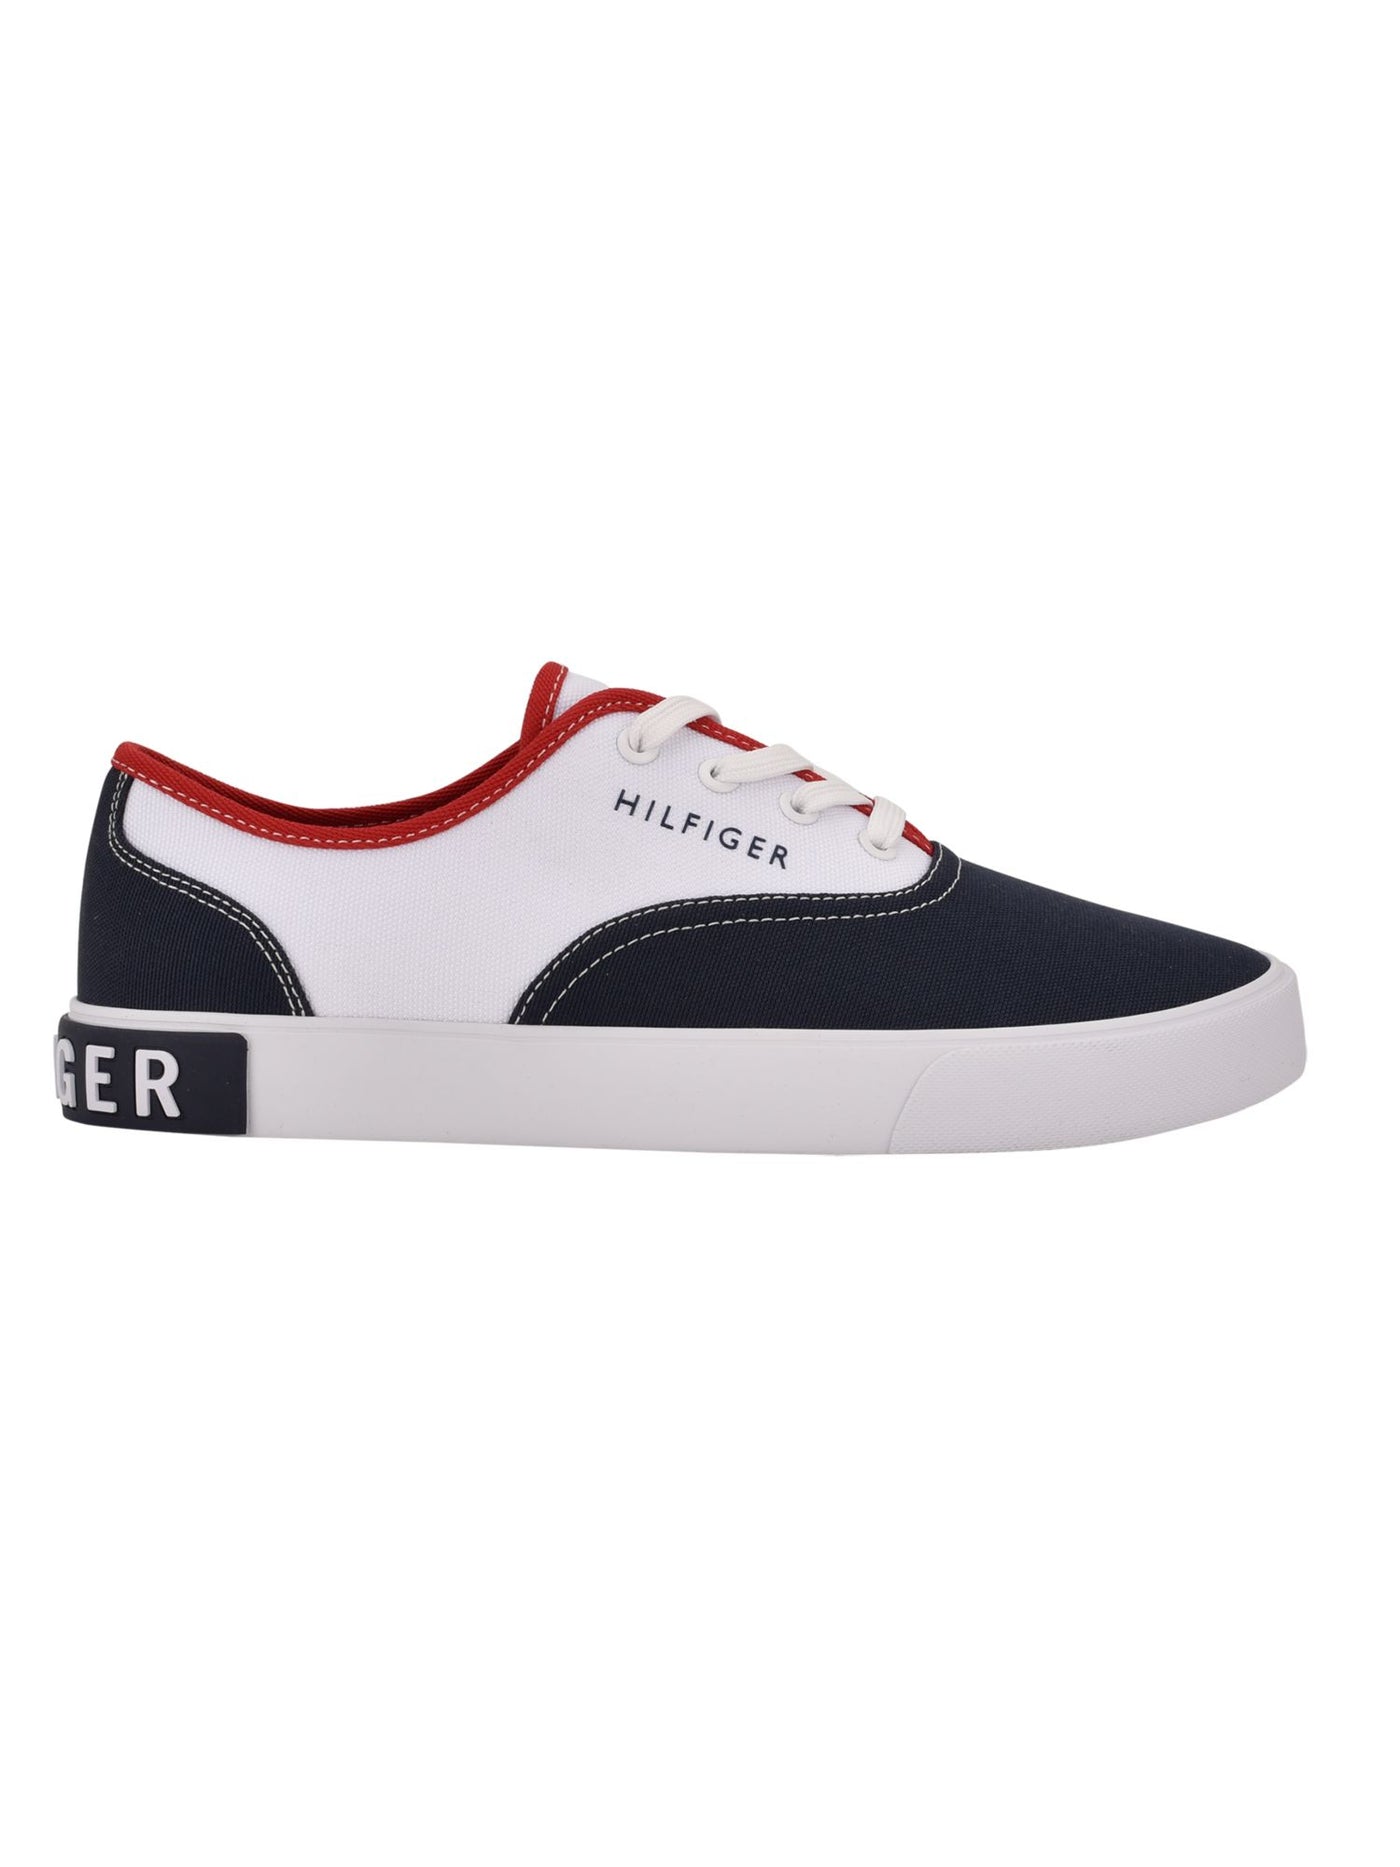 TOMMY HILFIGER Mens Blue Color Block Cushioned Comfort Ralem Round Toe Platform Lace-Up Sneakers Shoes 11.5